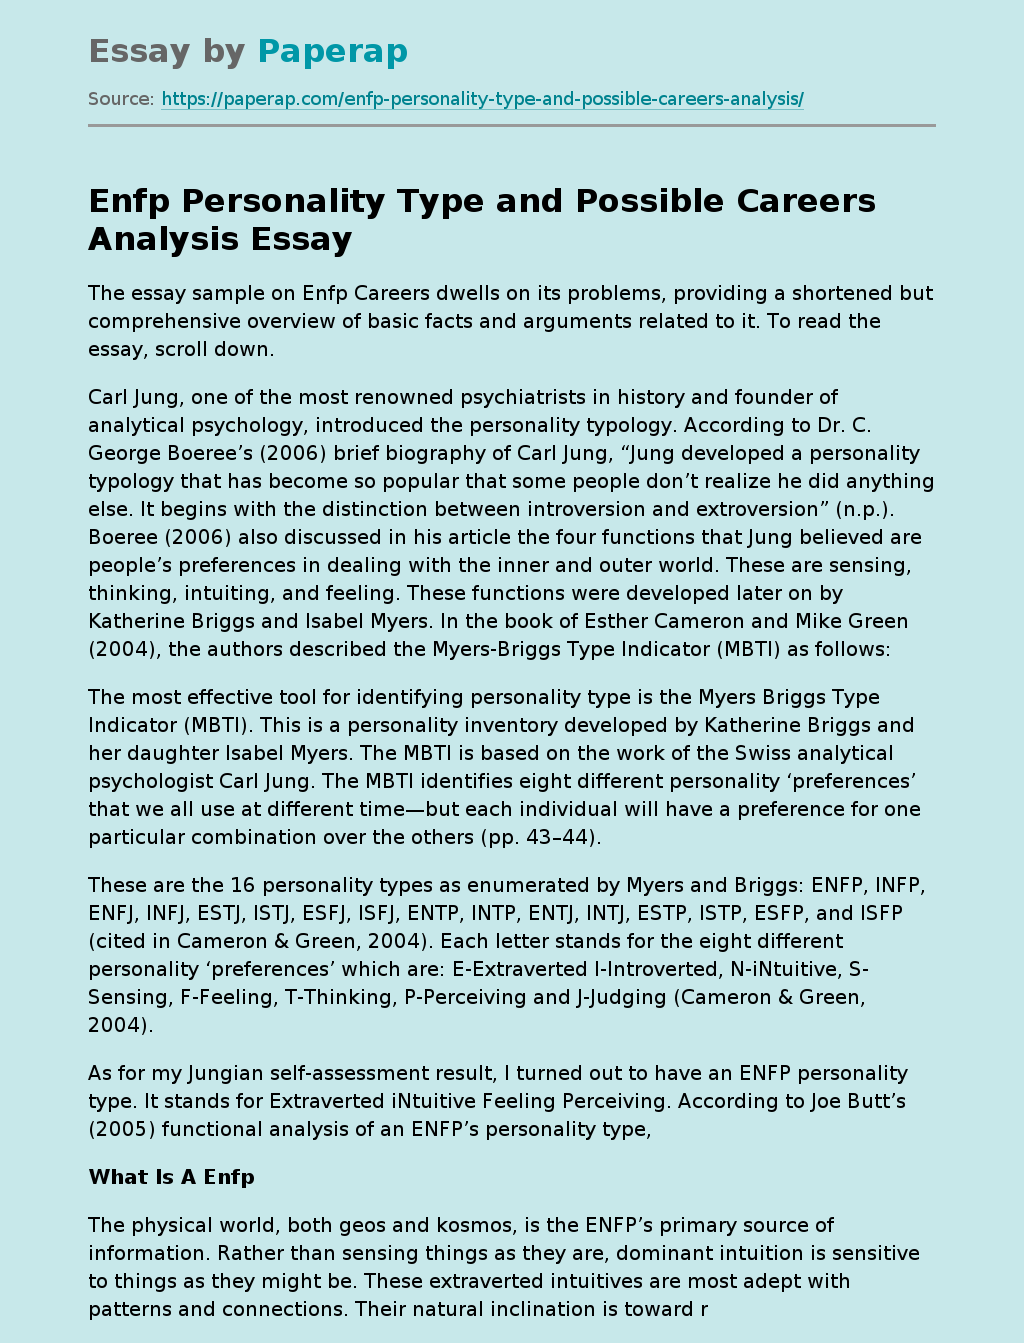 Enfp Personality Type and Possible Careers Analysis